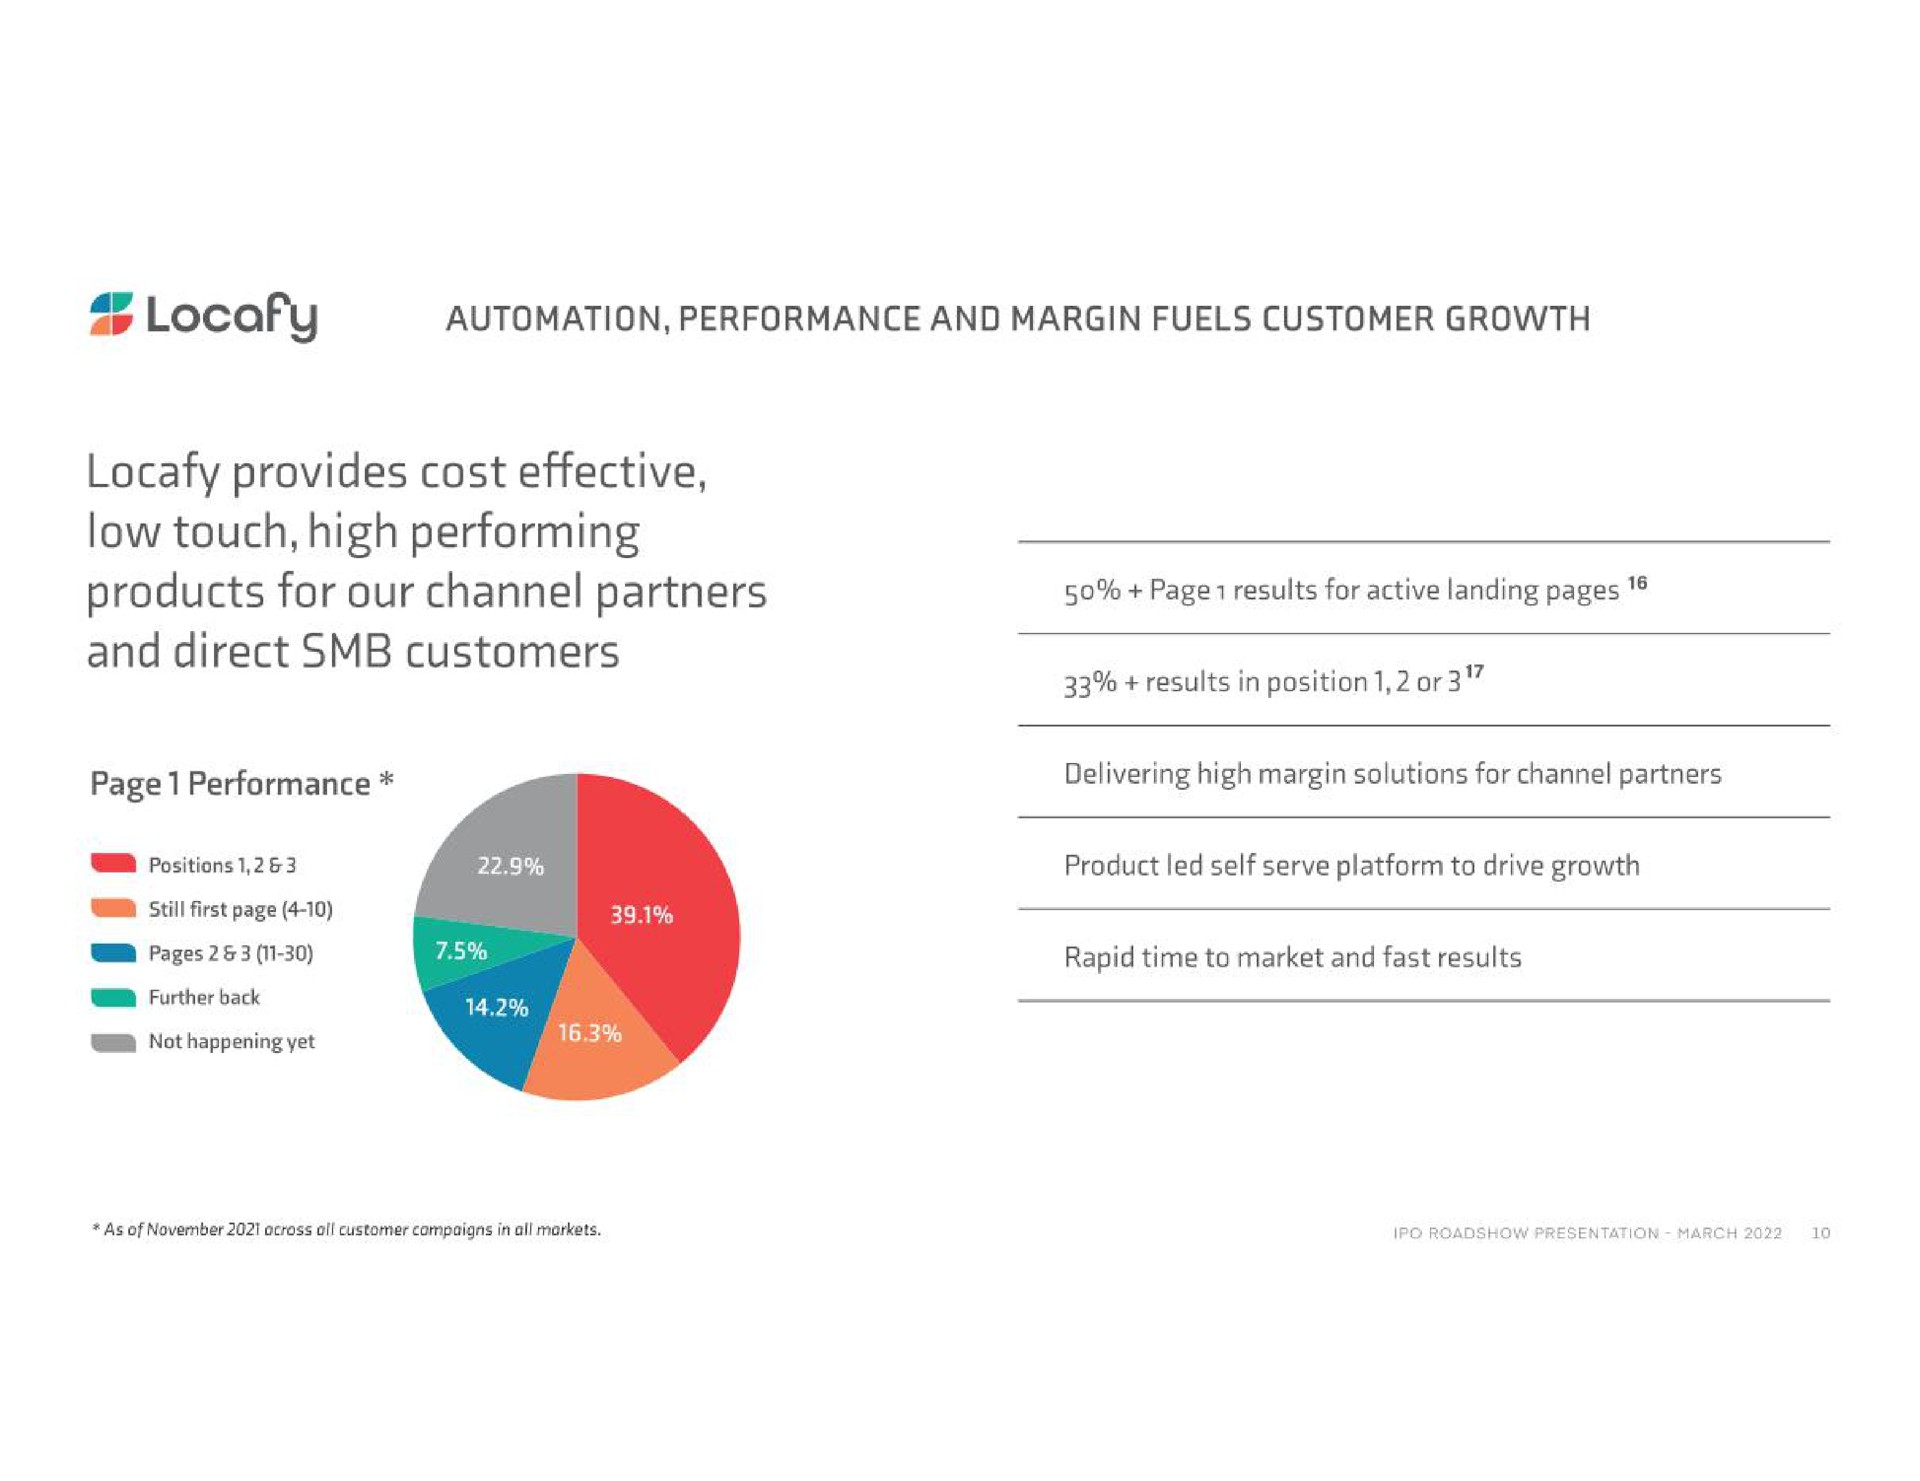 performance and margin fuels customer growth provides cost effective low touch high performing and direct customers | Locafy